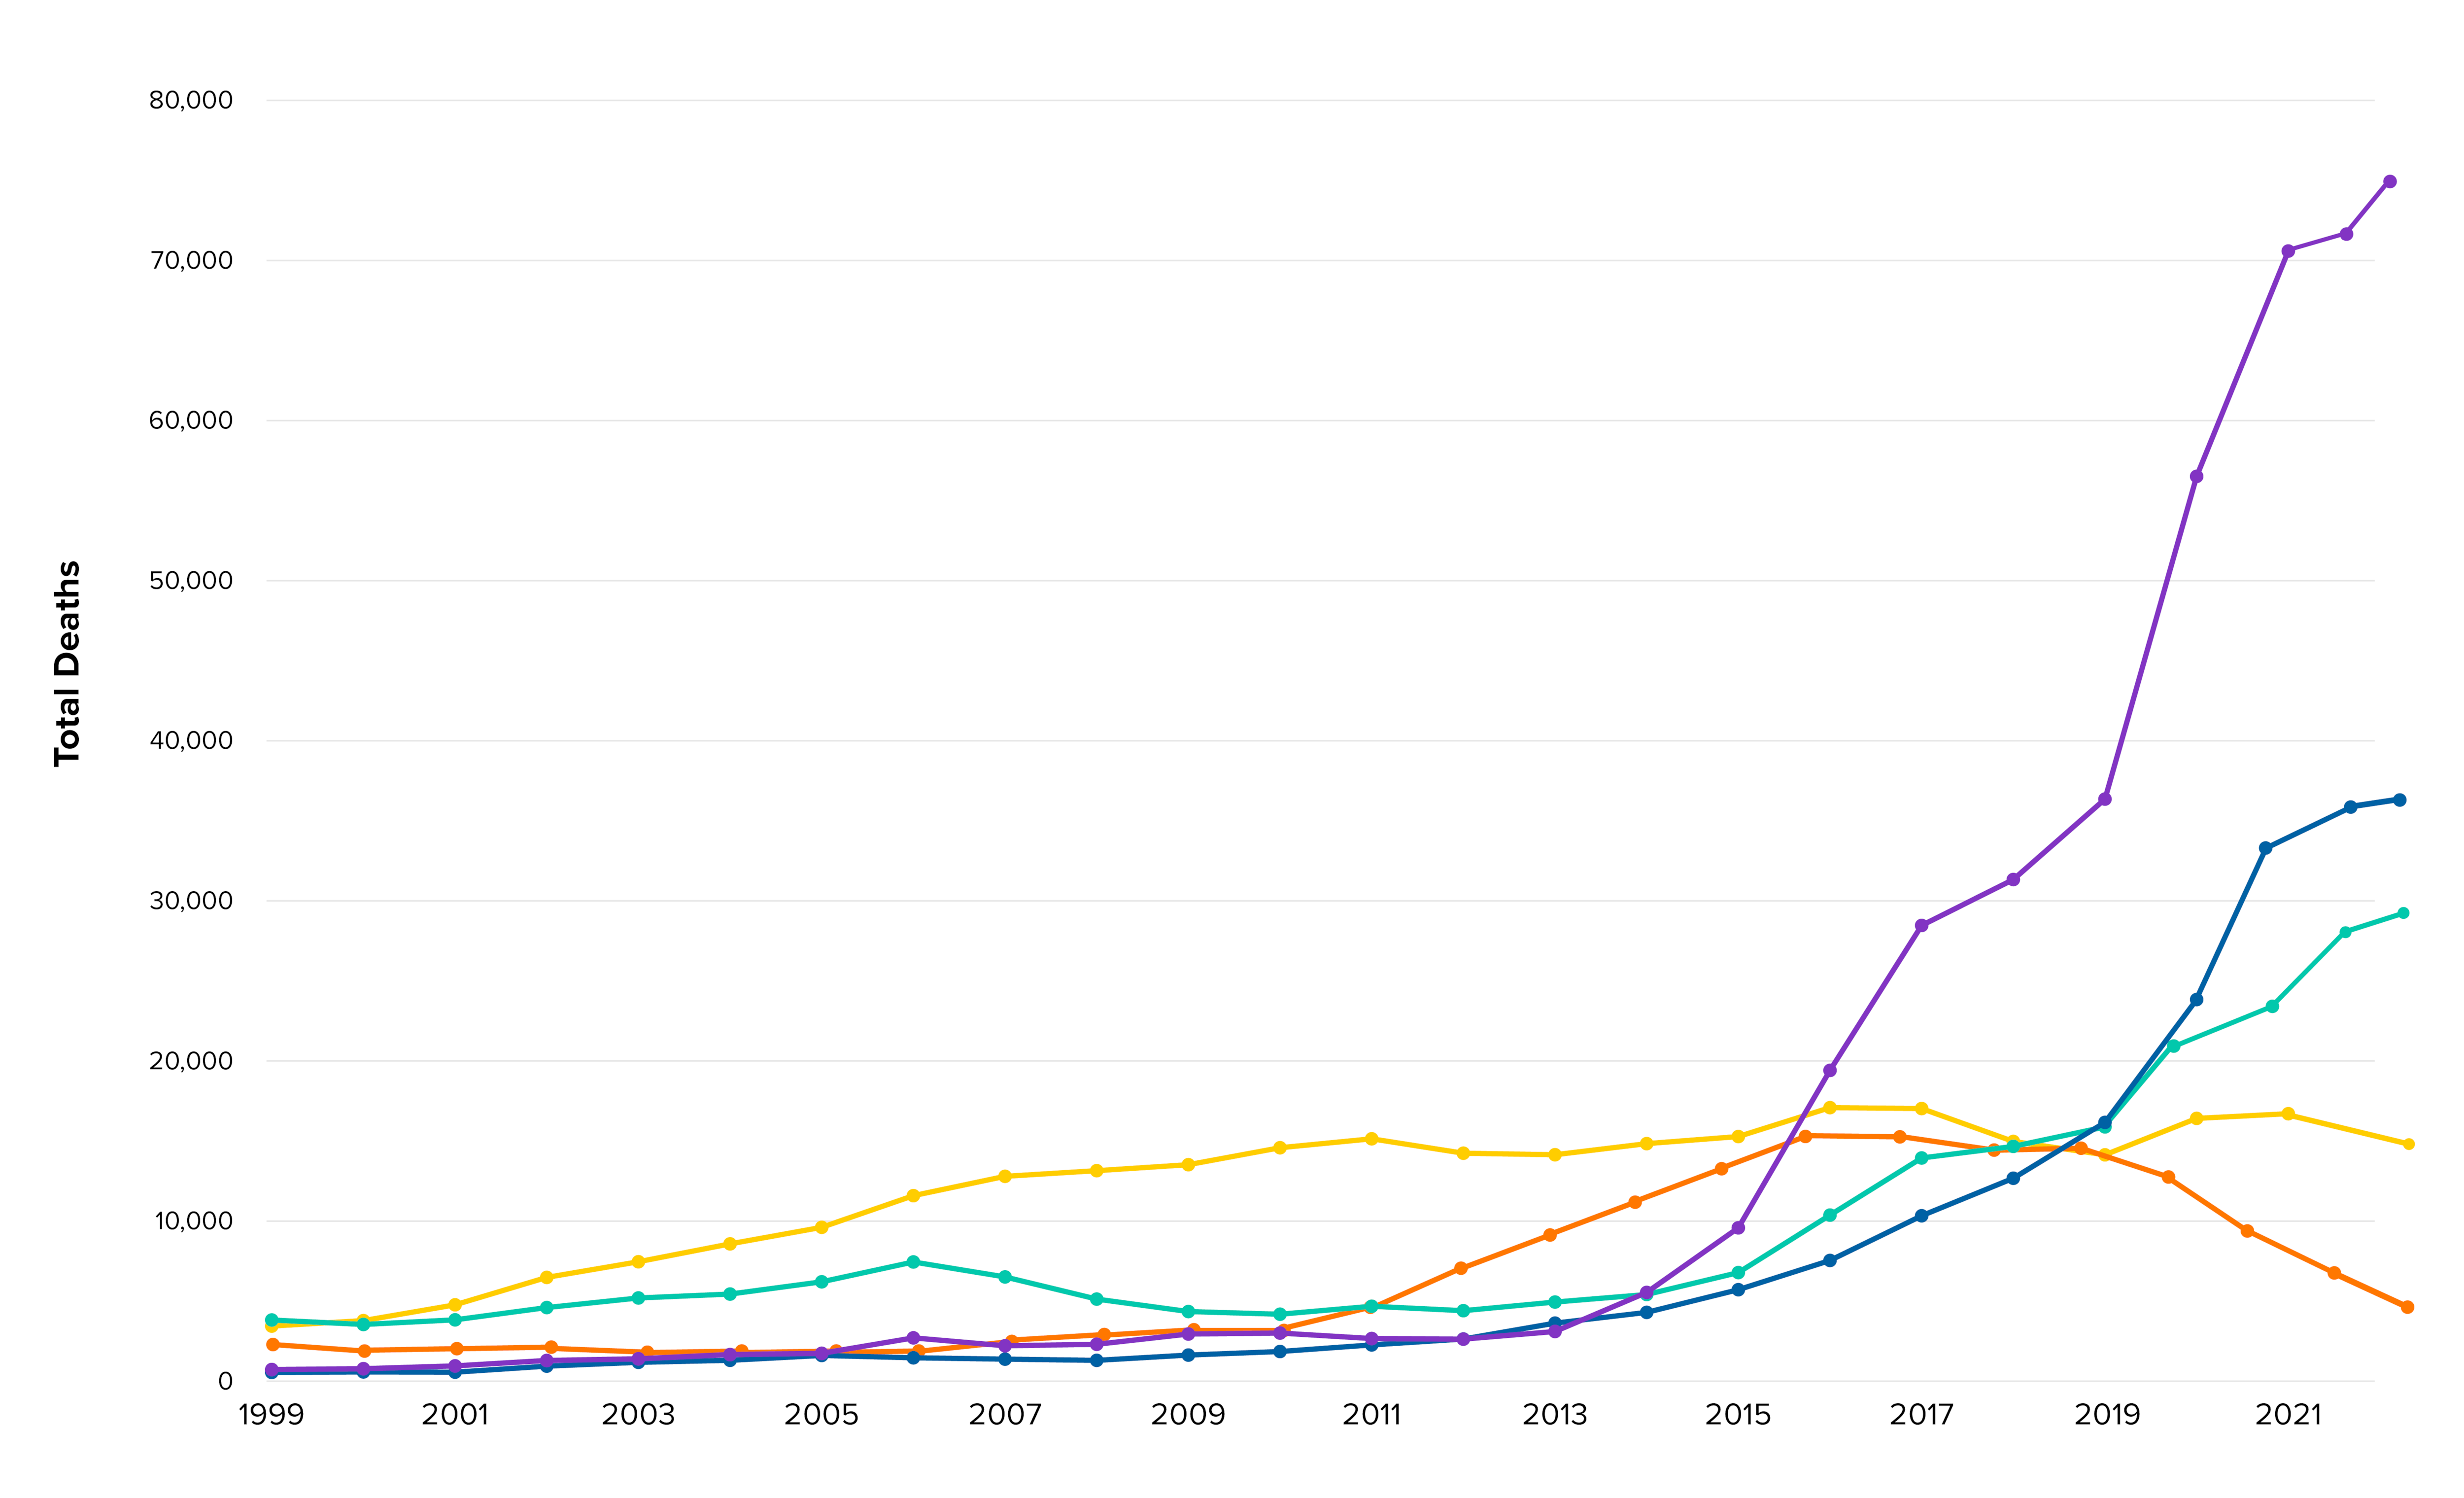 Line graph chart showing the upward trends in U.S. drug overdose deaths from 1999 - 2022.